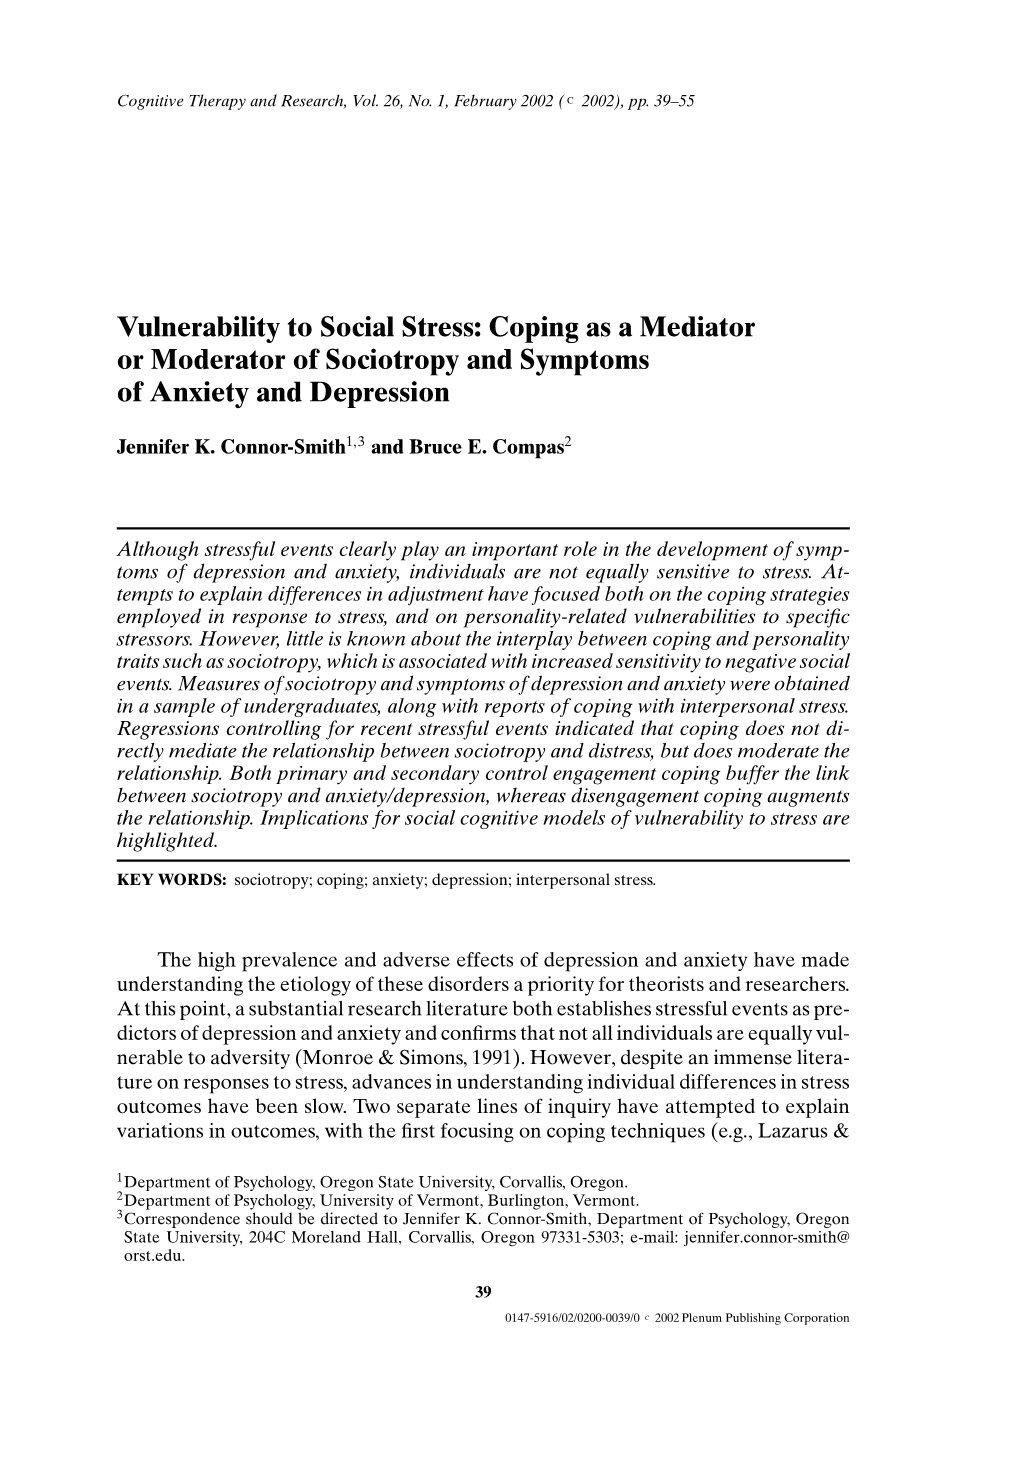 Vulnerability to Social Stress: Coping As a Mediator Or Moderator of Sociotropy and Symptoms of Anxiety and Depression